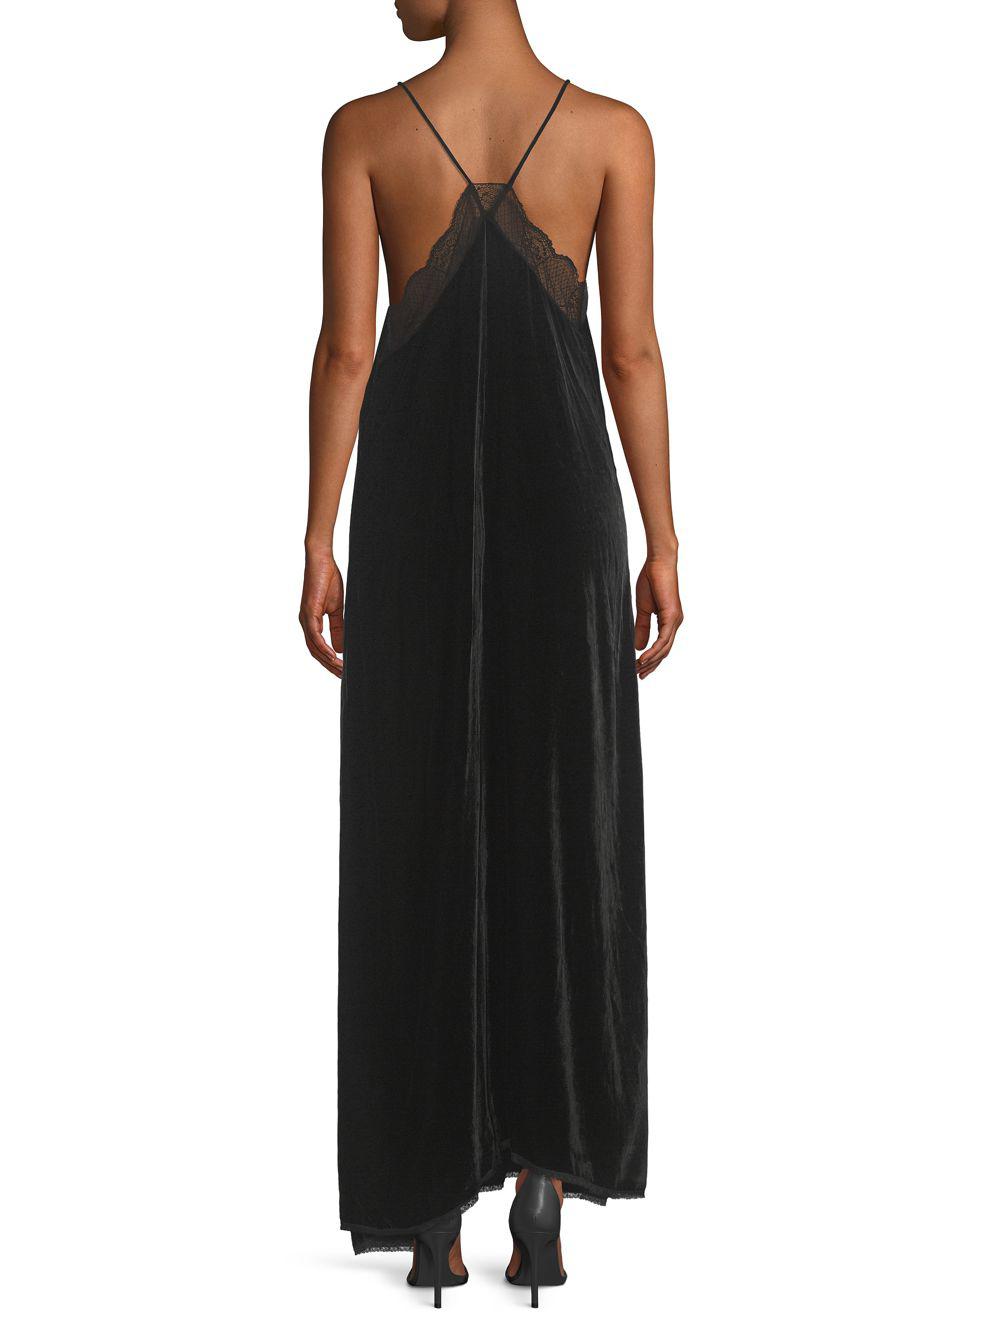 Zadig & Voltaire Risty Lace-trimmed Velvet Maxi Dress in Black - Lyst